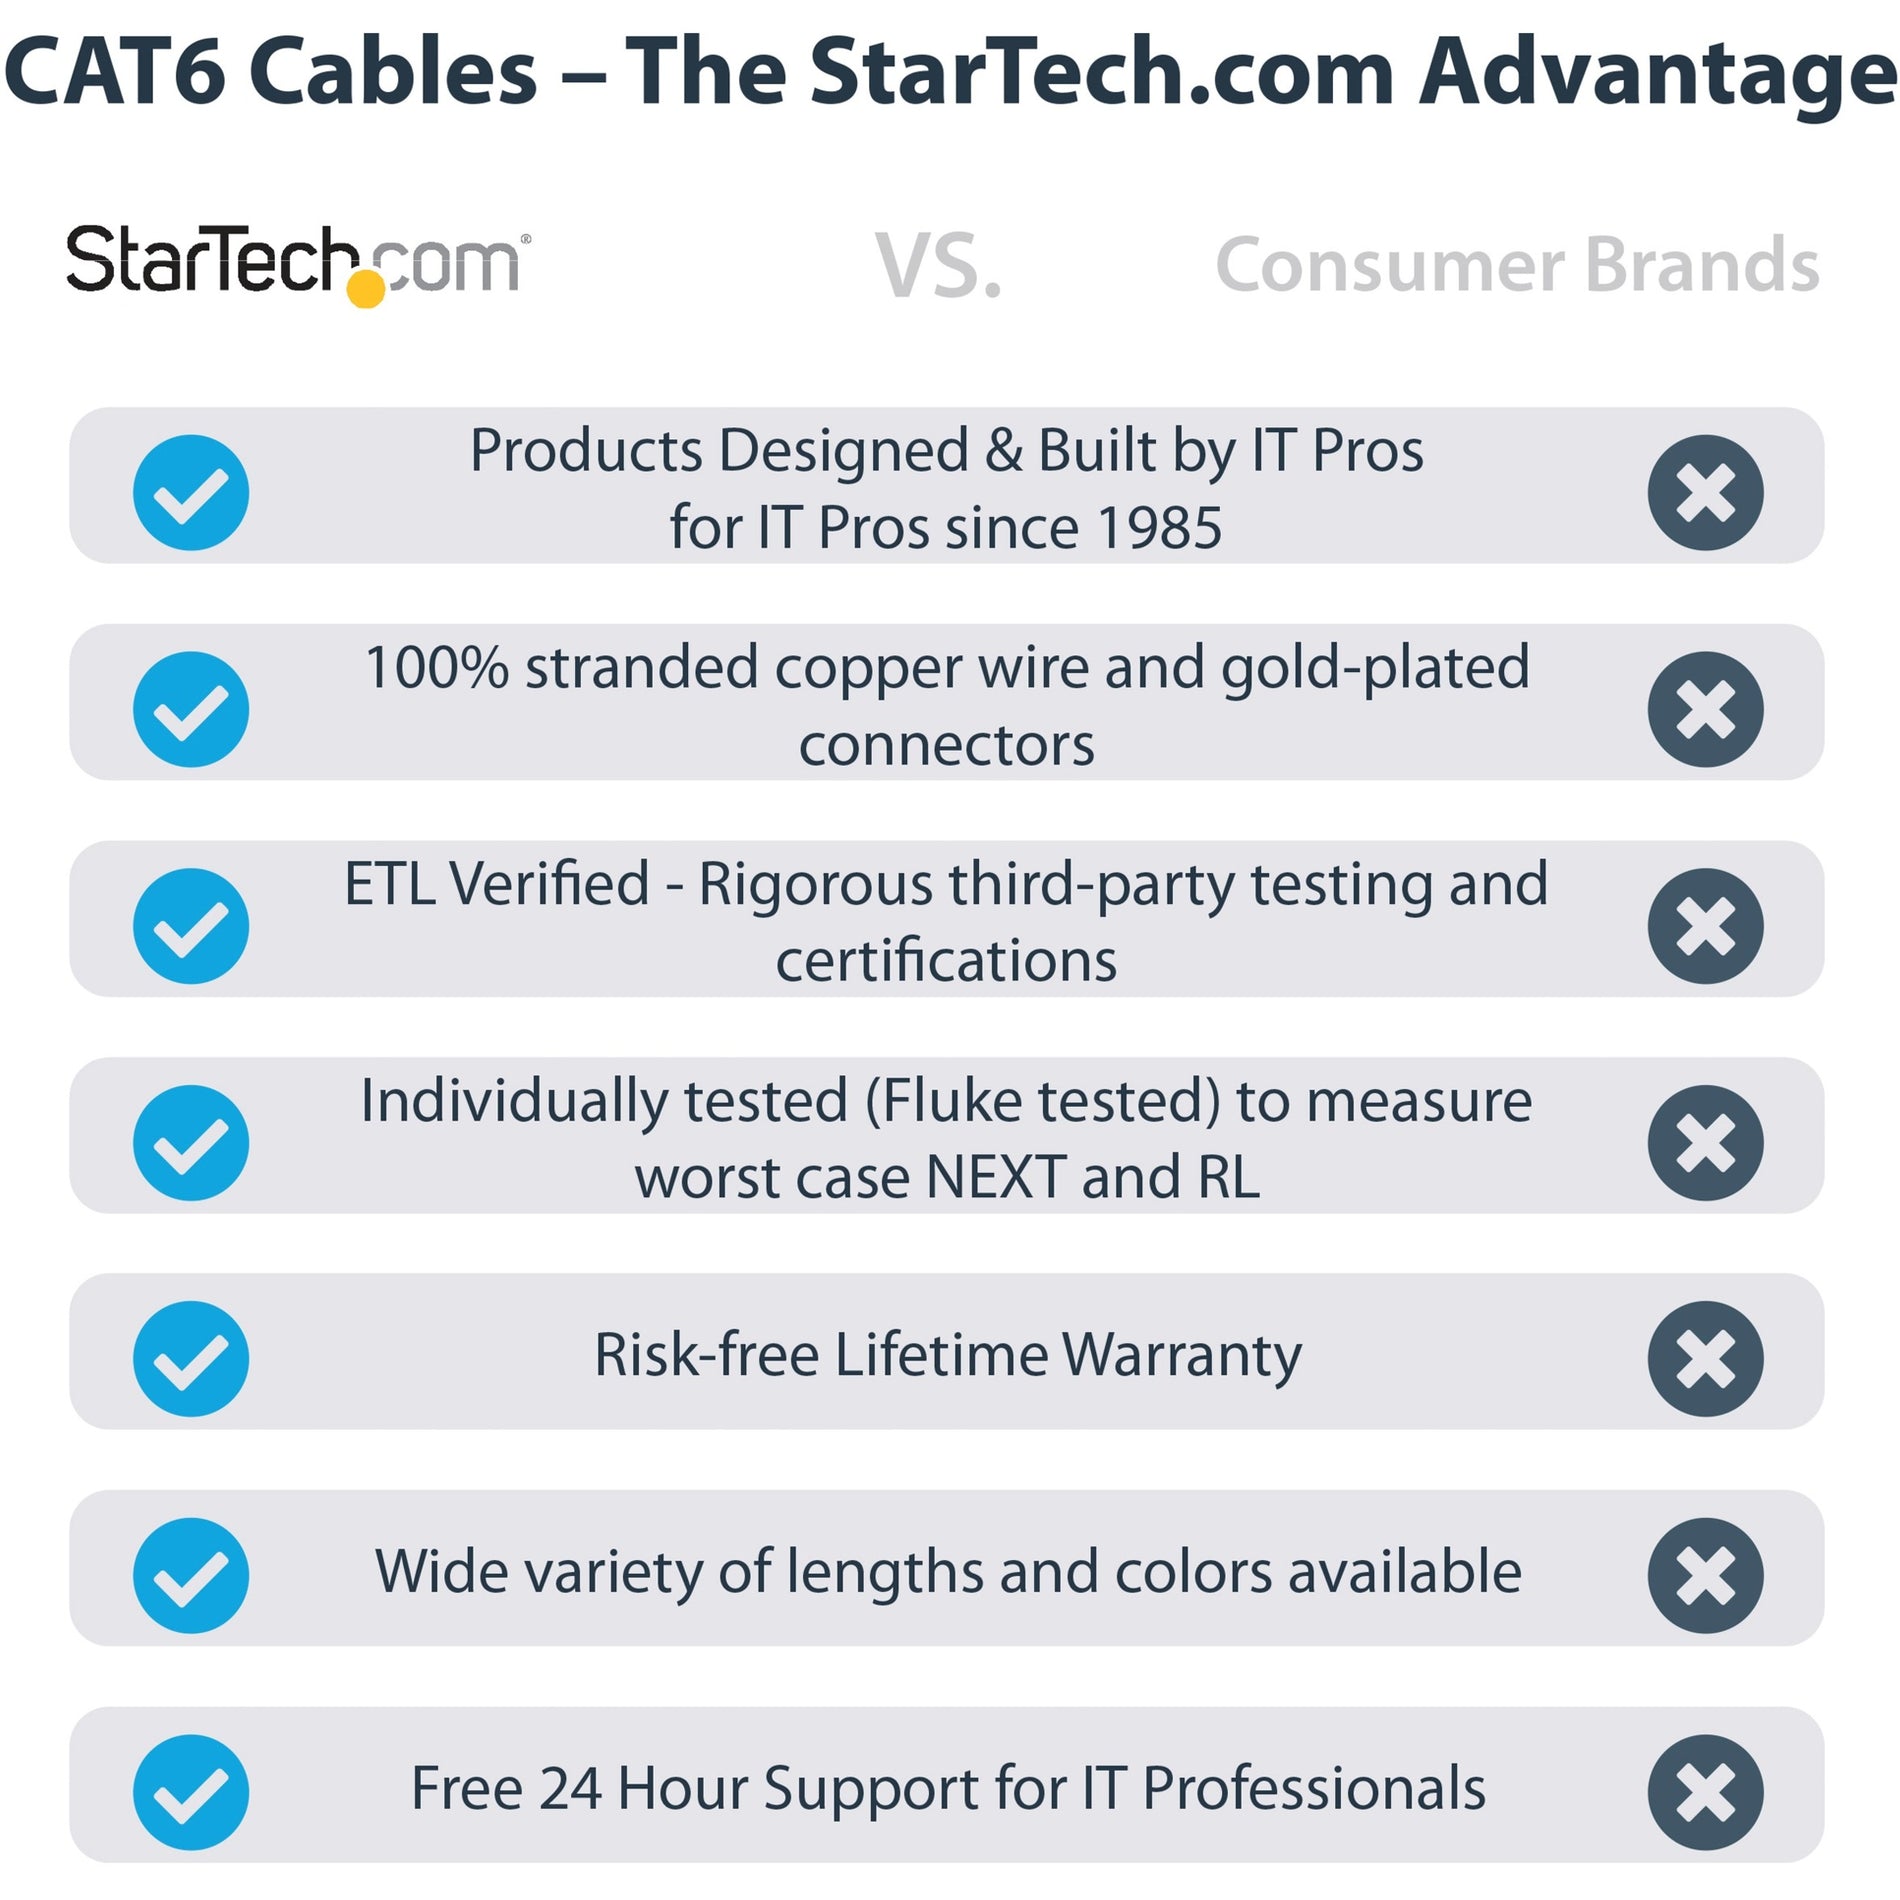 StarTech.com N6PATCH2BK Cat. 6 Network Cable, 2ft Black Cat6 Patch Cable with Snagless RJ45 Connectors, Ethernet Cable